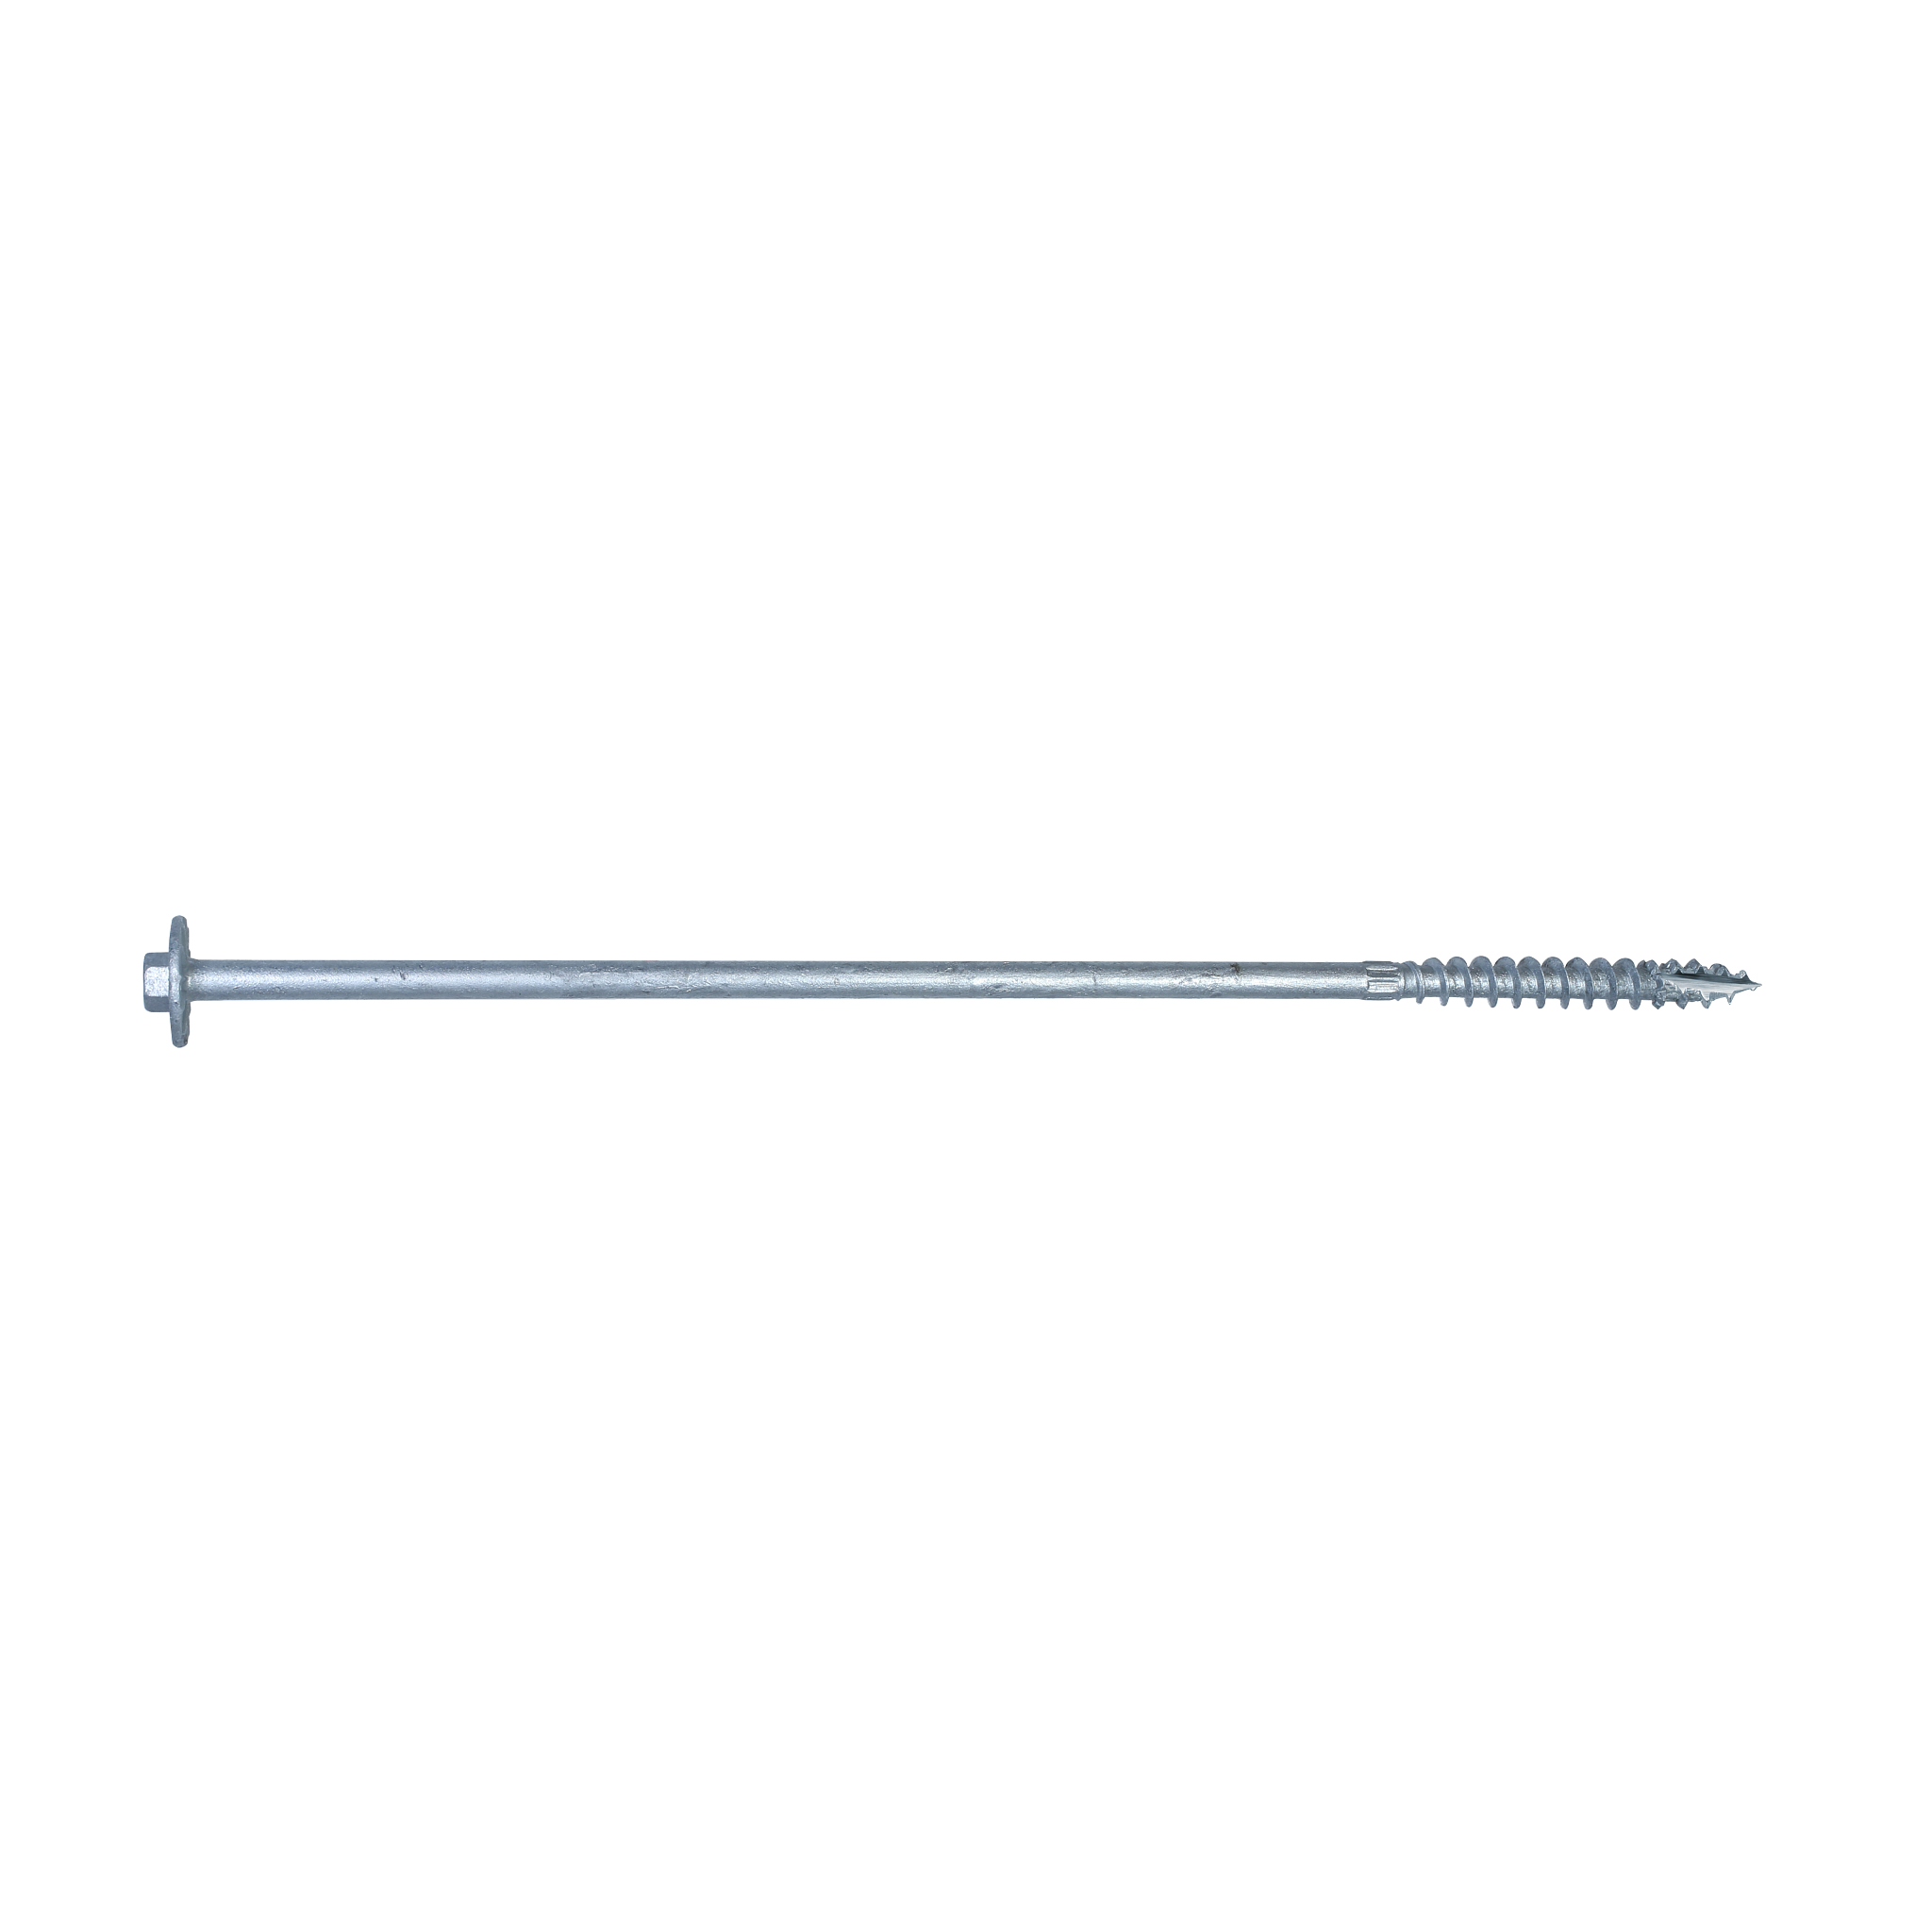 Strong-Drive® SDWH TIMBER-HEX HDG Screw — 0.276 in. x 12 in. 3/8 Hex (150-Qty)